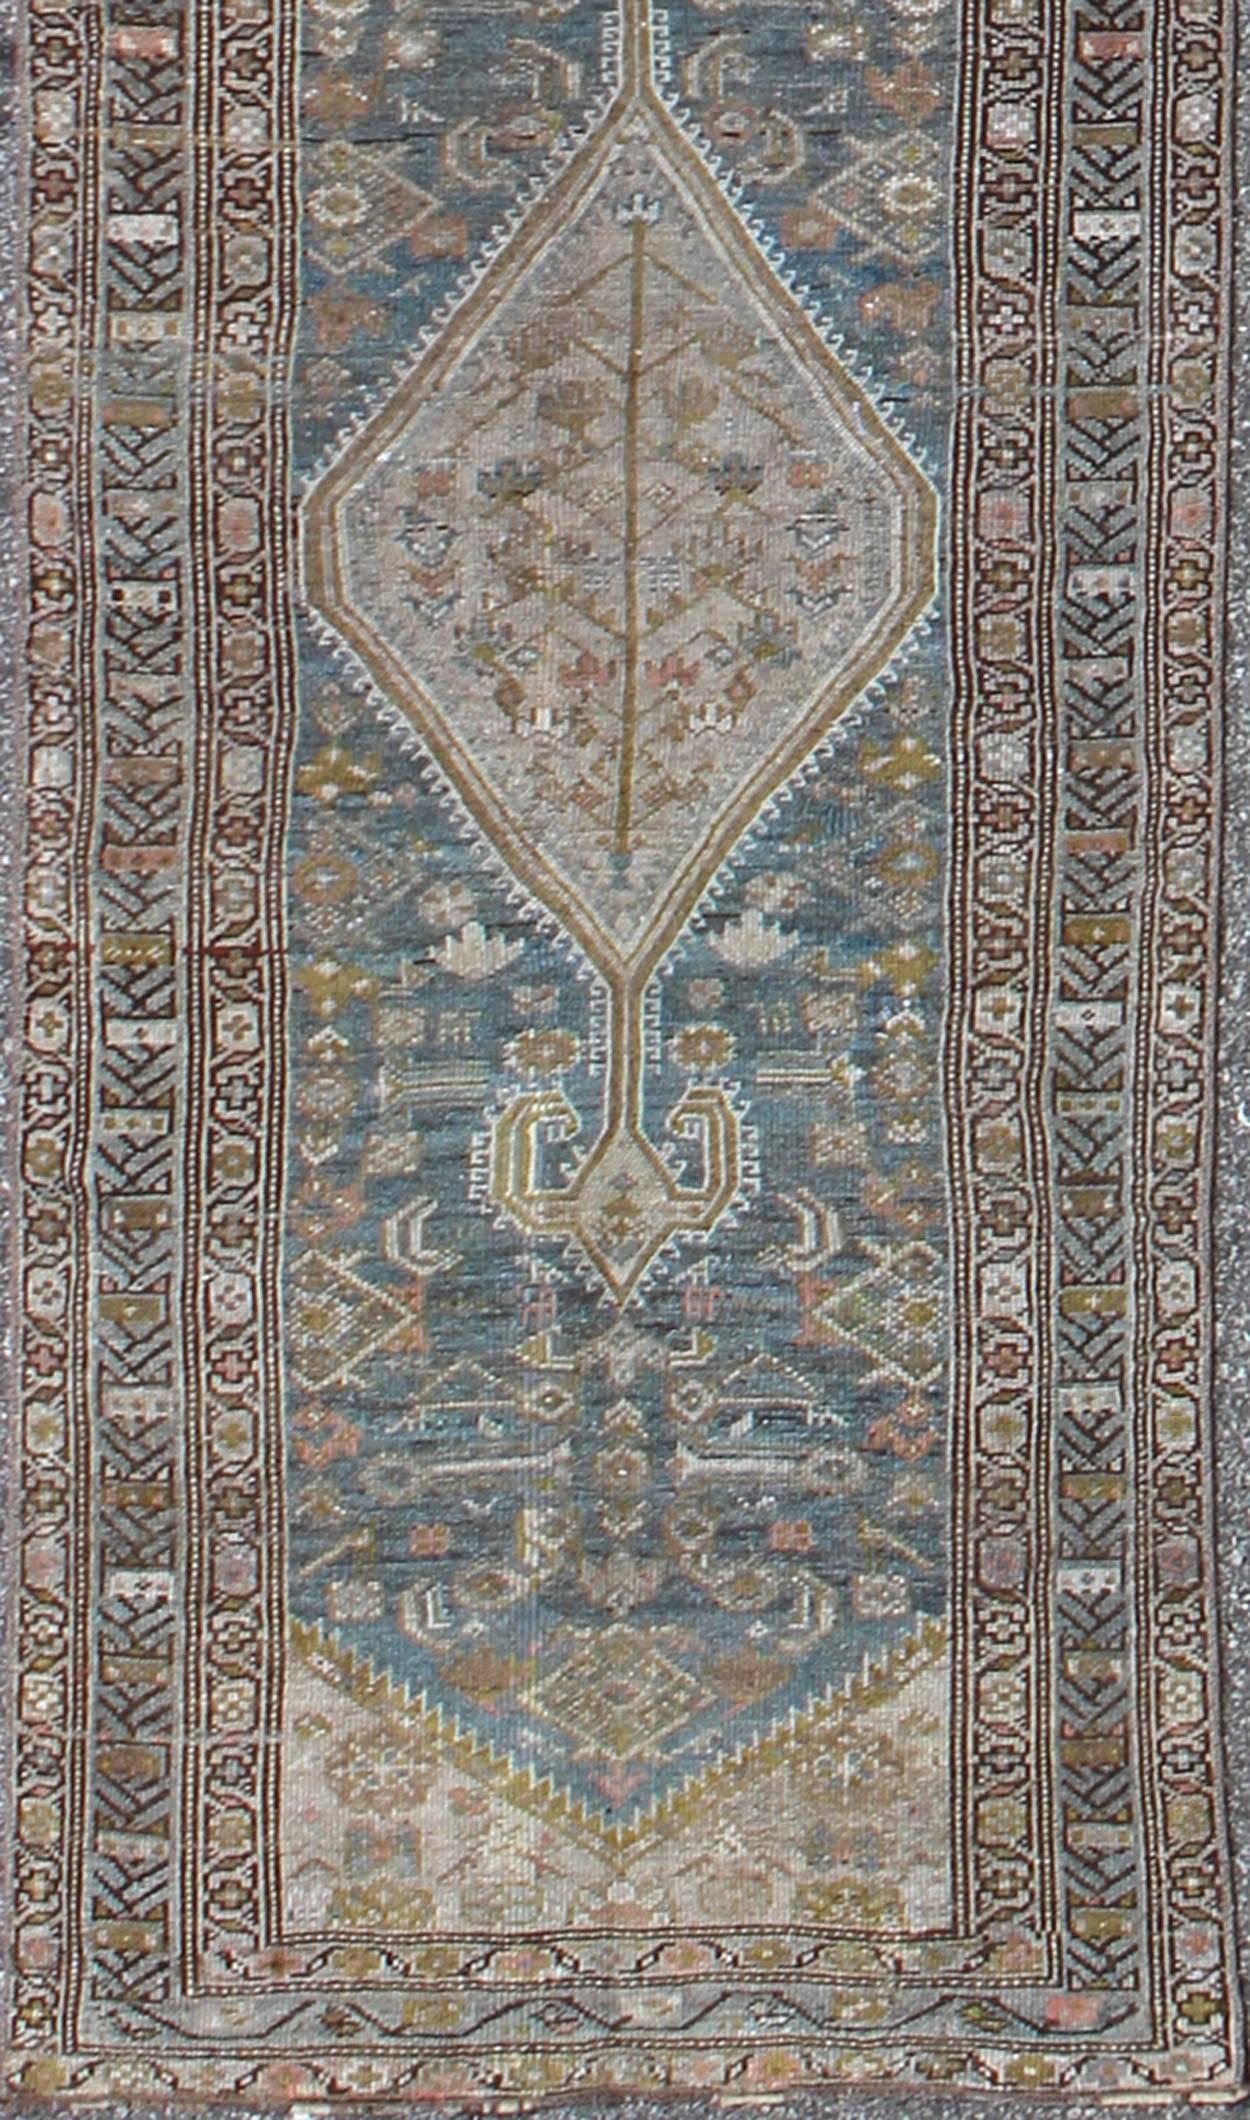 Persian Malayer Runner with Free-Flowing Geometric Pattern and Blue Field

This Persian Malayer runner features a multitude of shades of blue and ivory. The elegant, all-over design in the field consists of a free-flowing geometric pattern, which